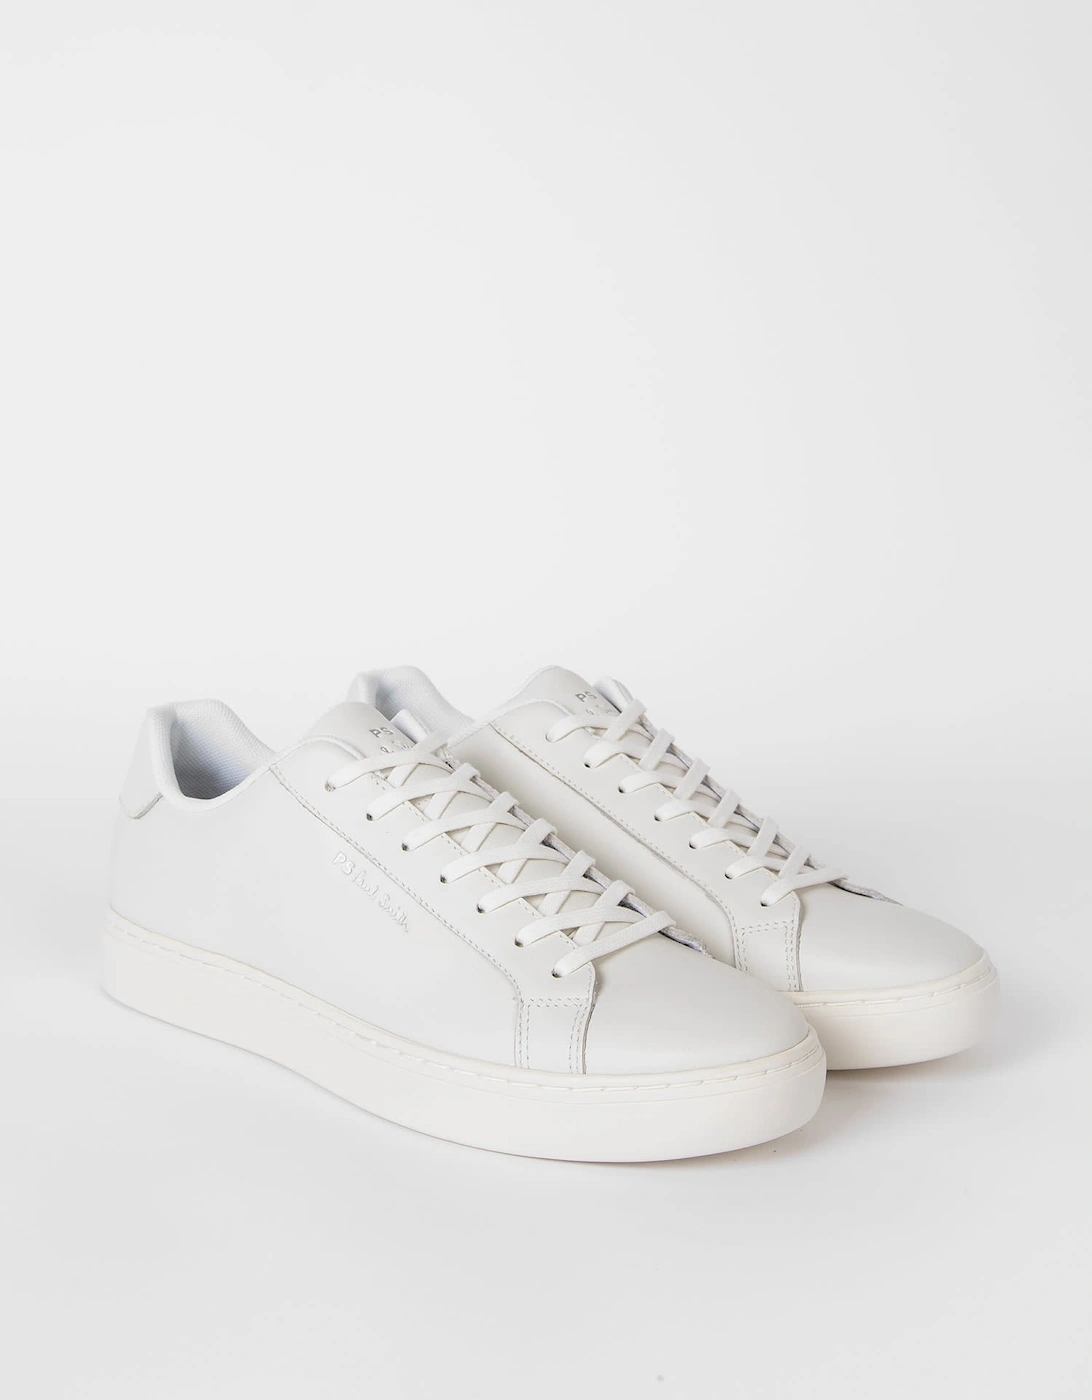 PS Rex White Tape Trainers 01 WHITE